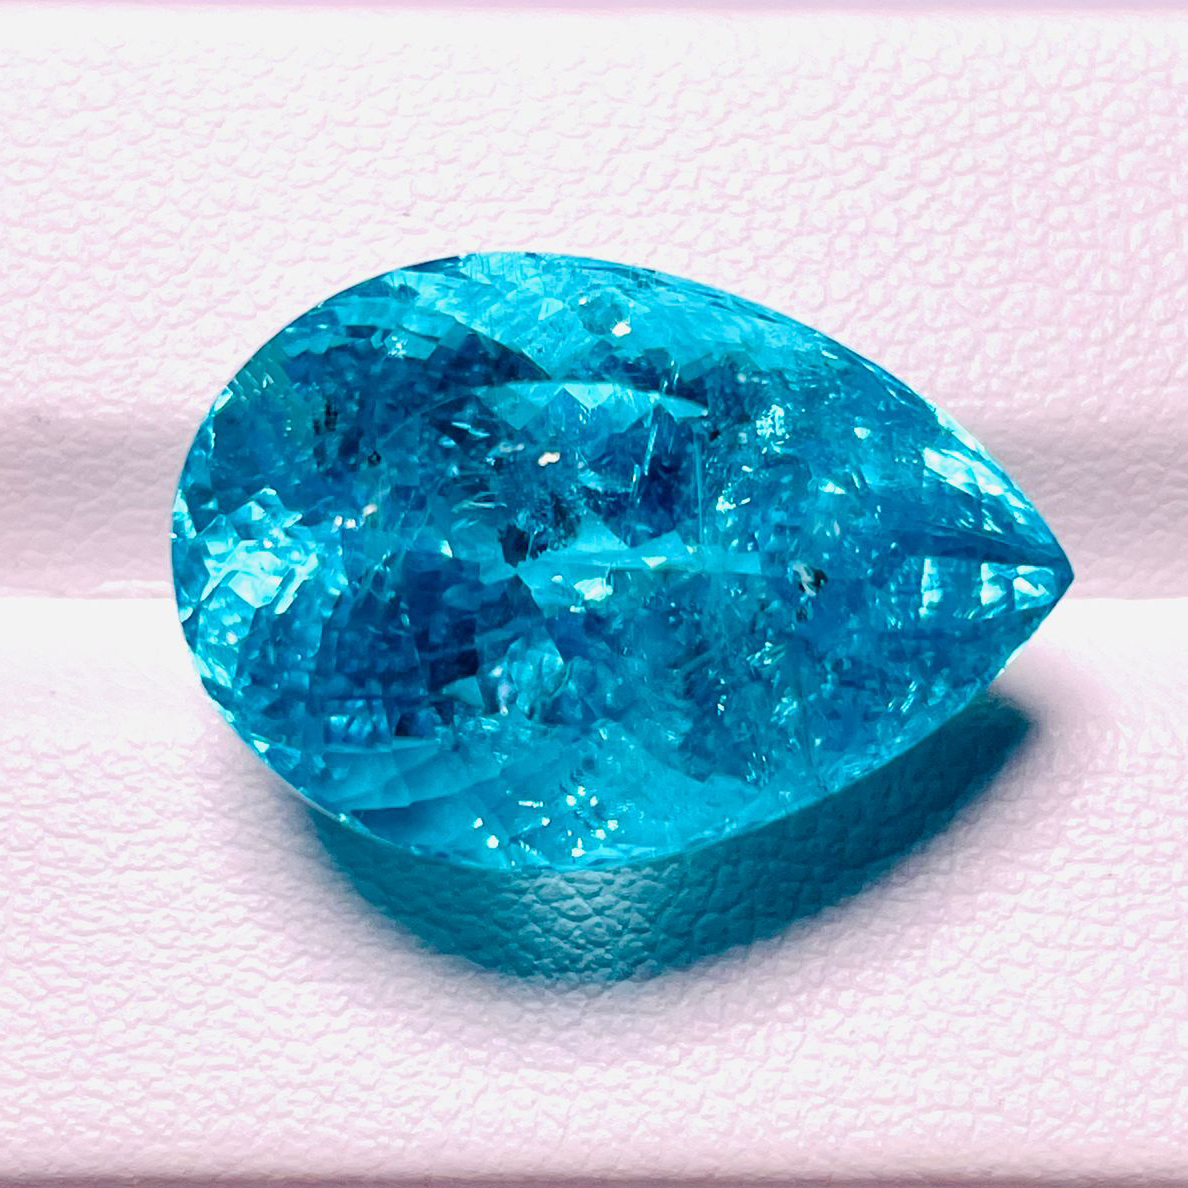 Details about   Certified 6.00 Ct UNHEATED Natural Neon Blue Copper Bearing Paraiba Tourmaline 